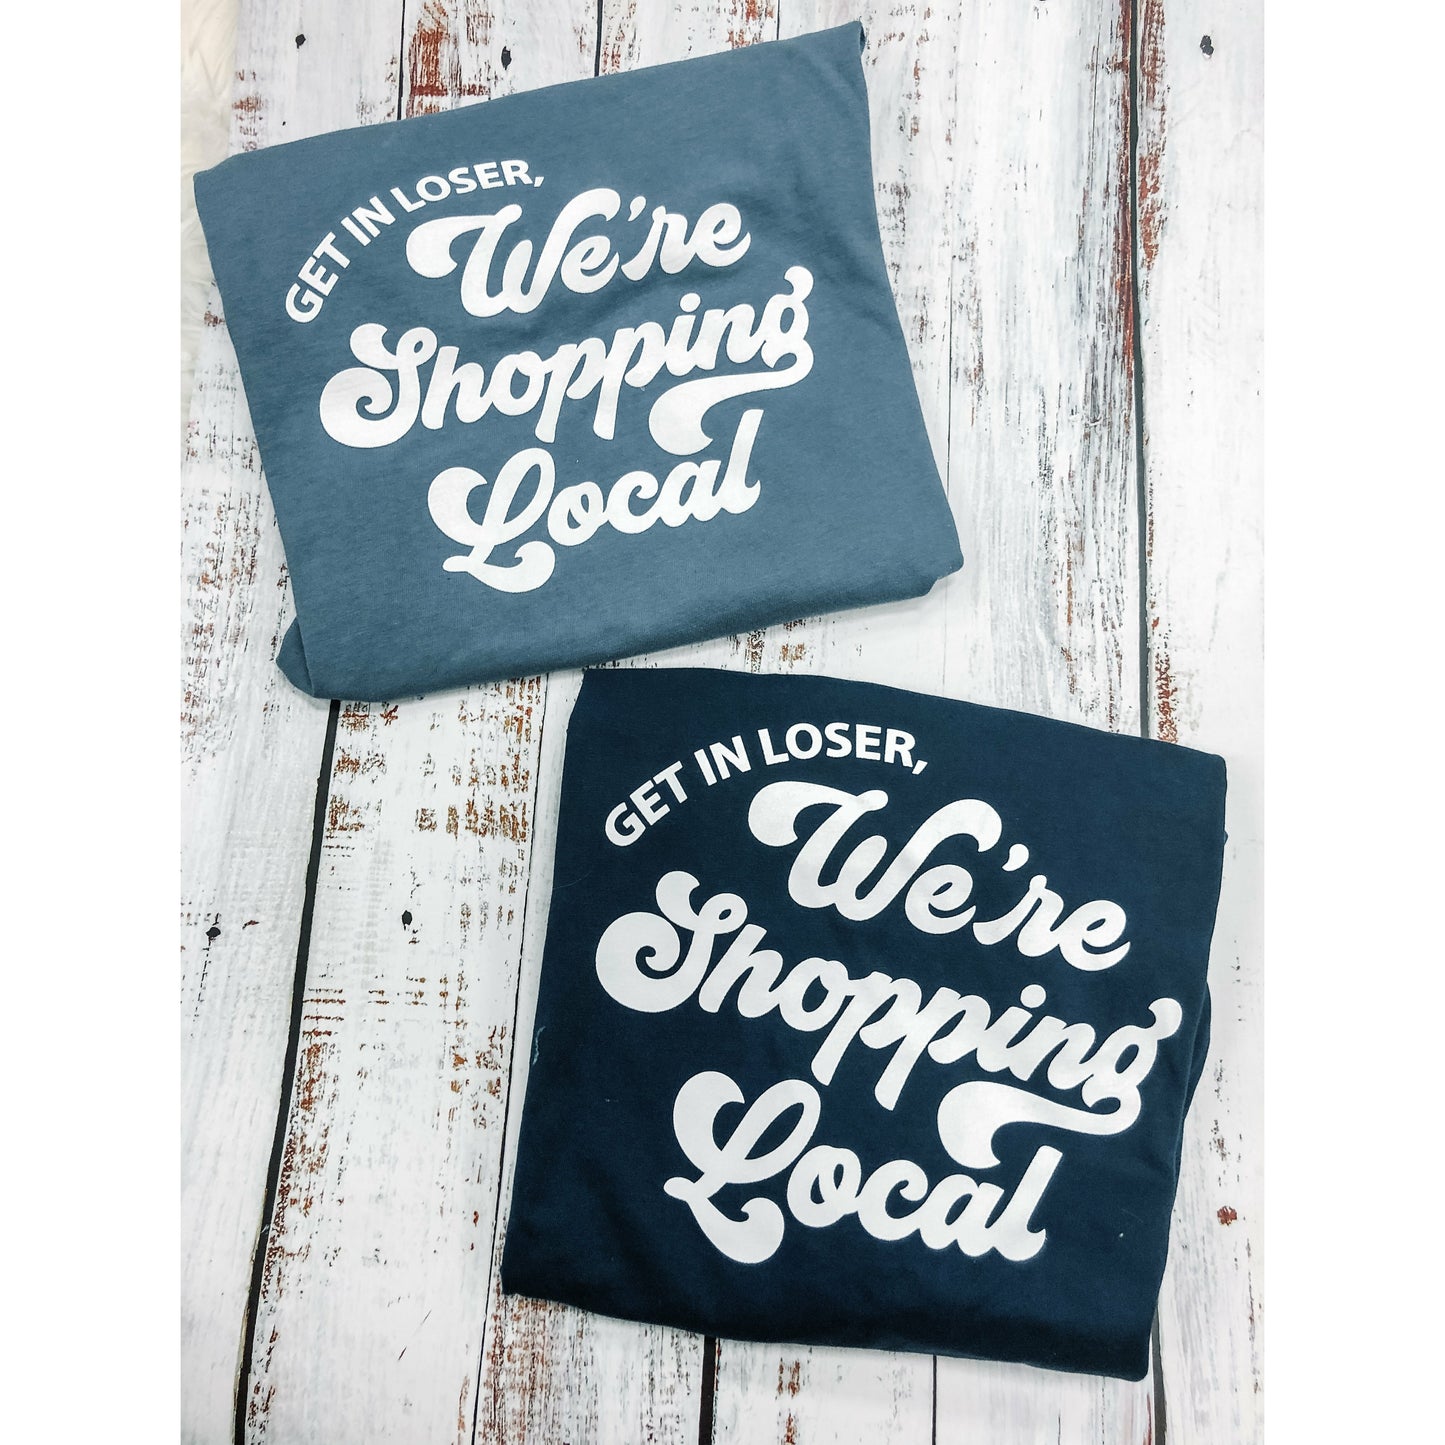 We're Shopping Local Tee